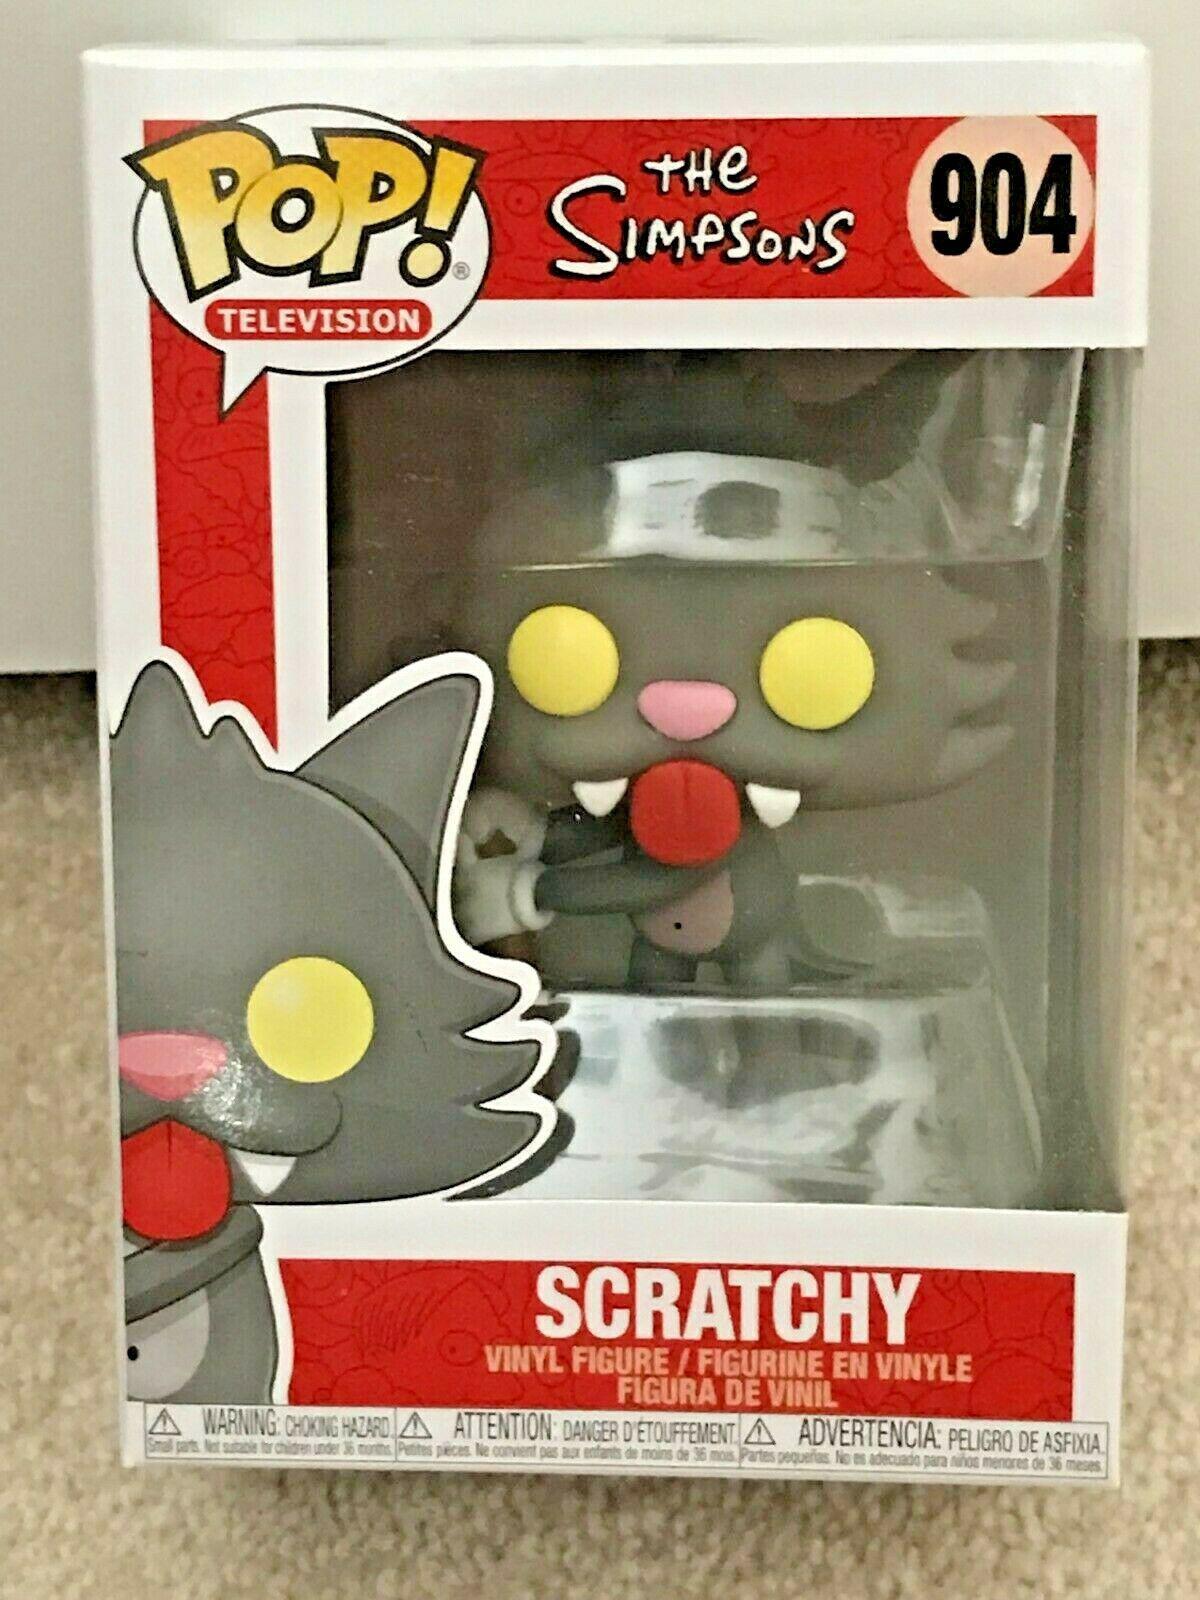 SCRATCHY FUNKO POP! THE SIMPSONS 904